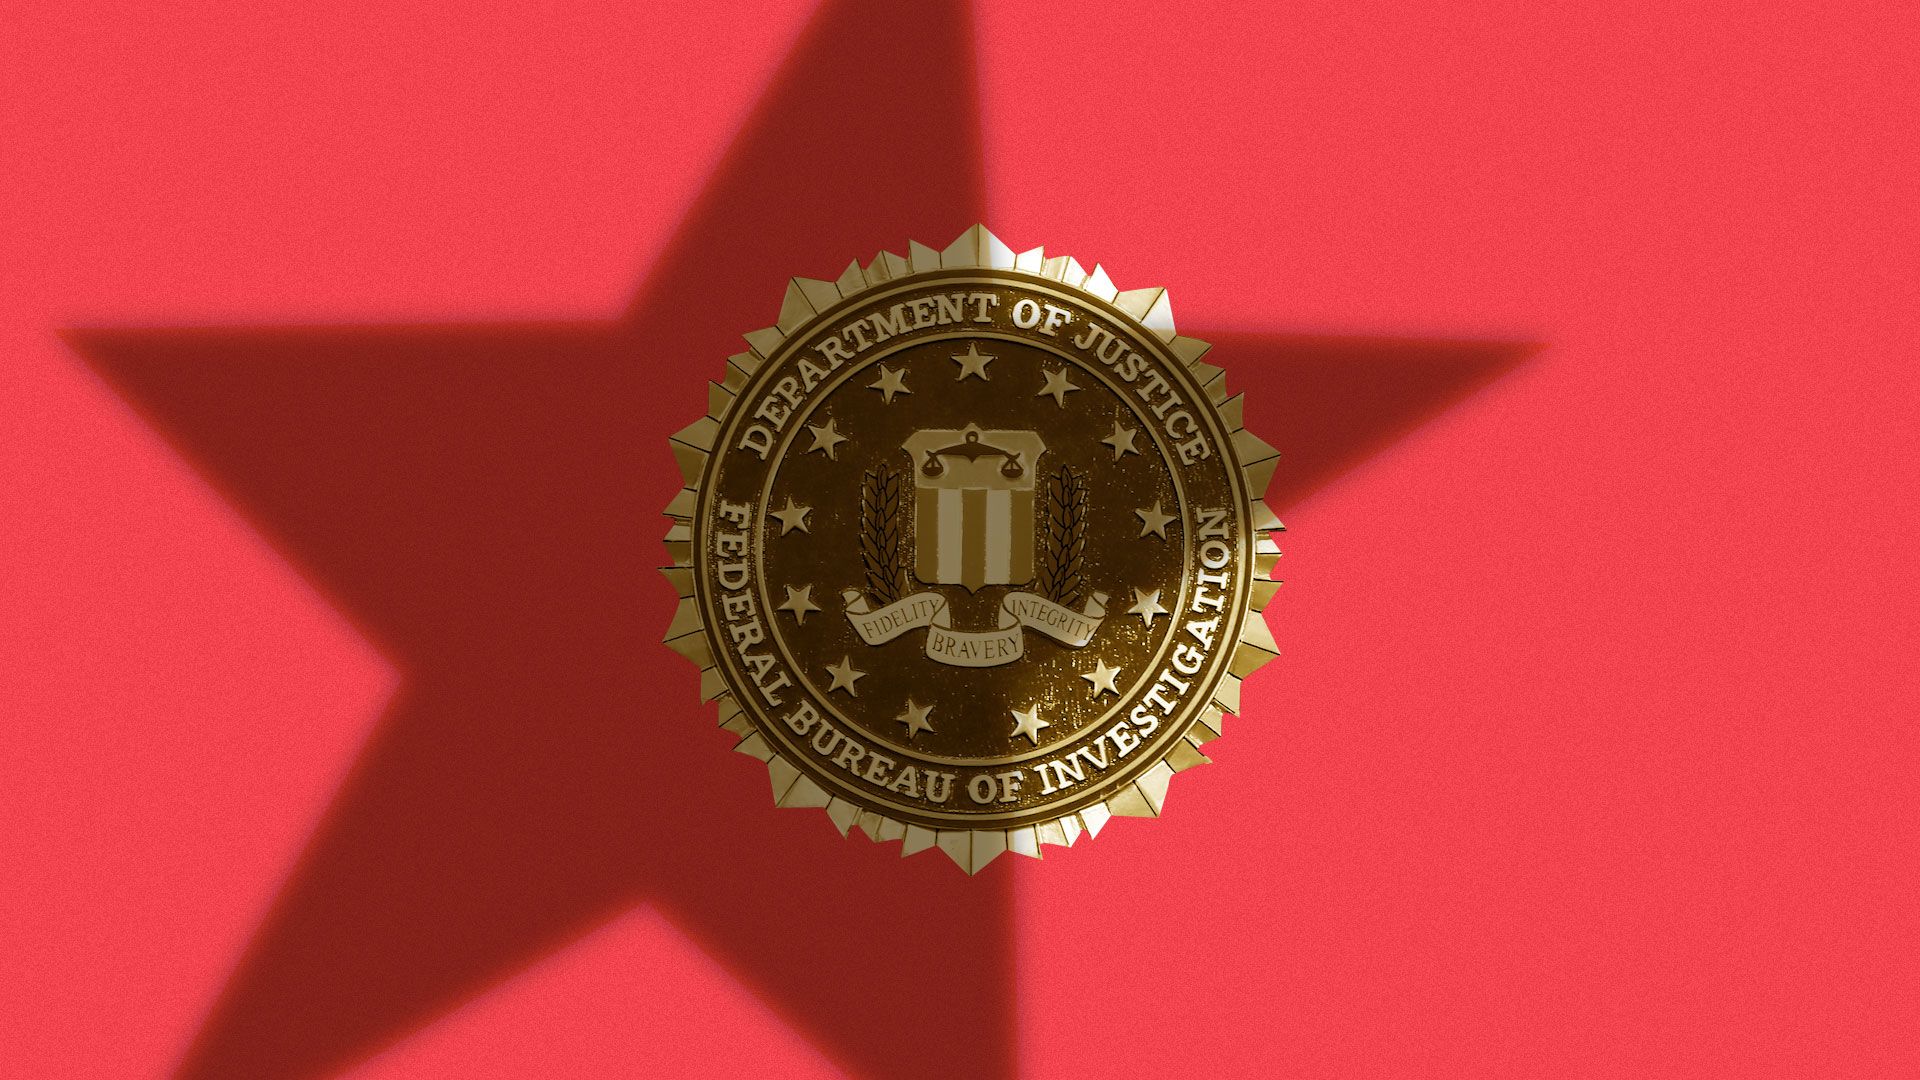 Illustration of F.B.I. seal with a large star shadow over it.